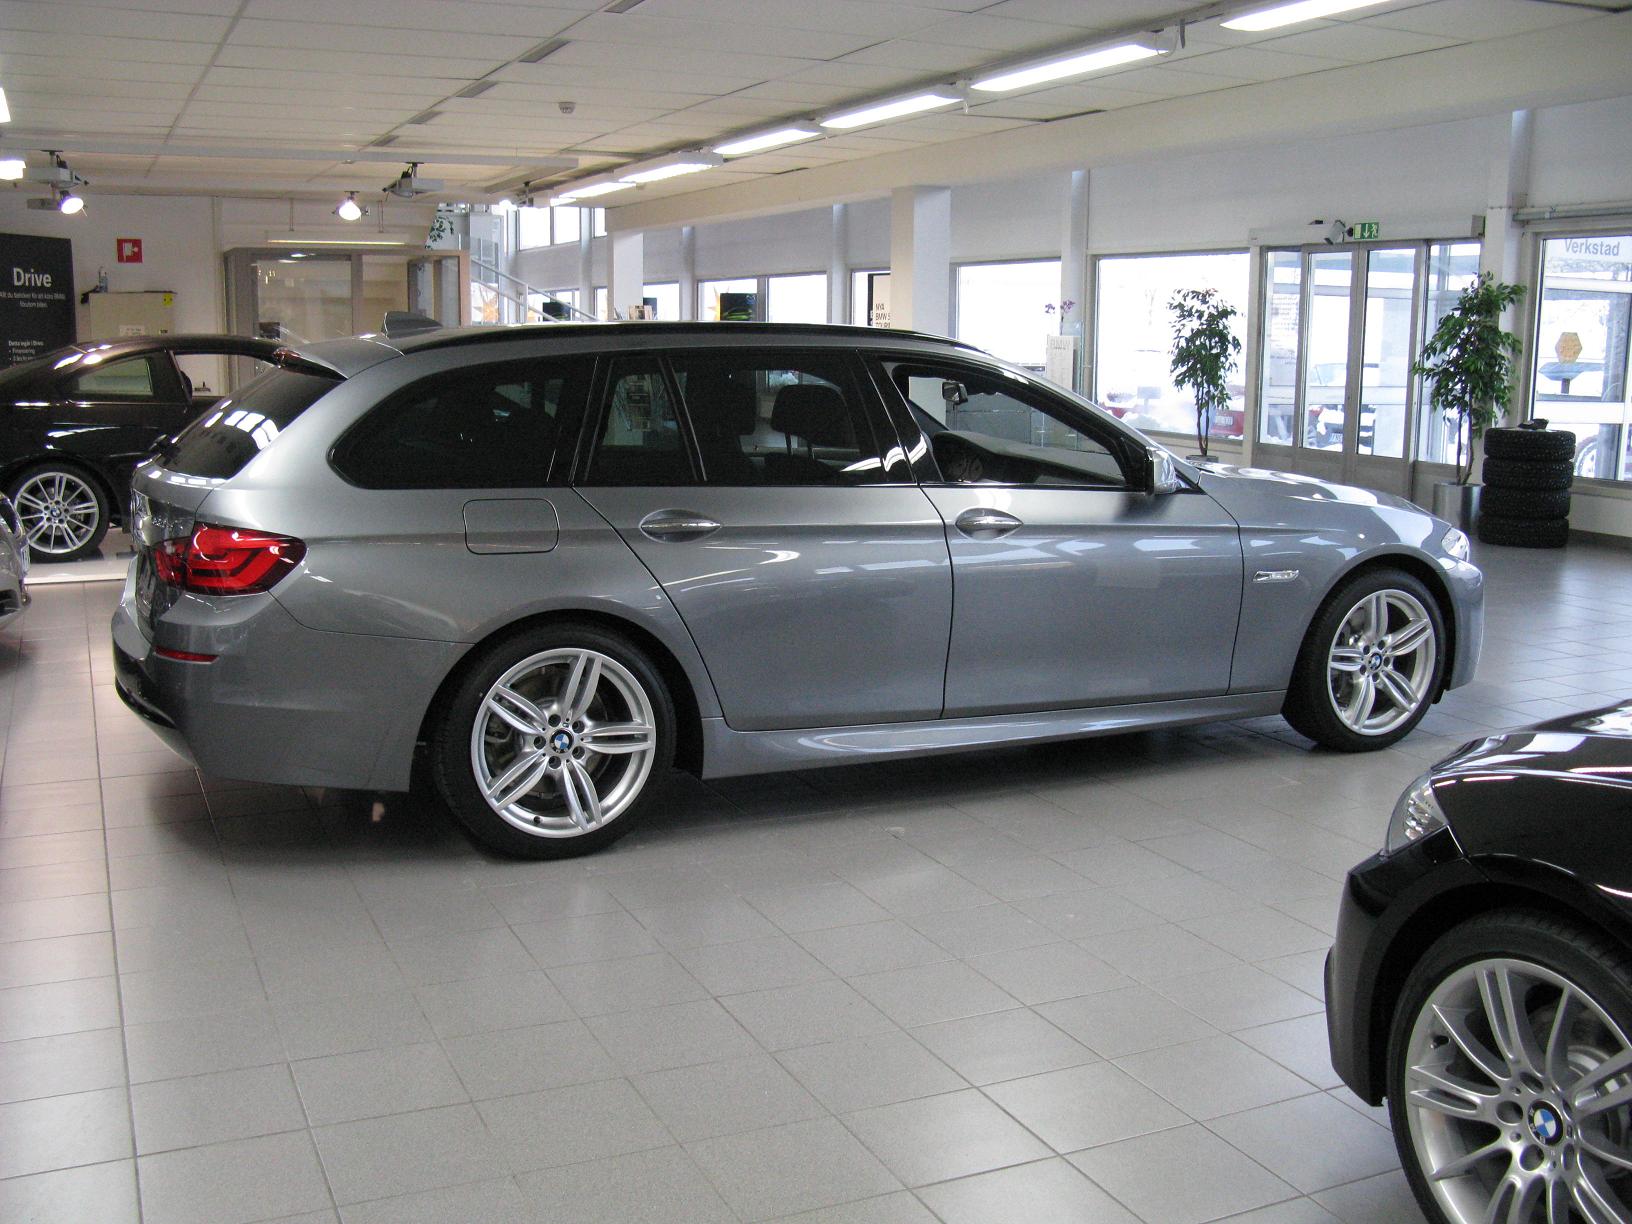 BMW 530d Touring M Sport | Flickr - Photo Sharing!